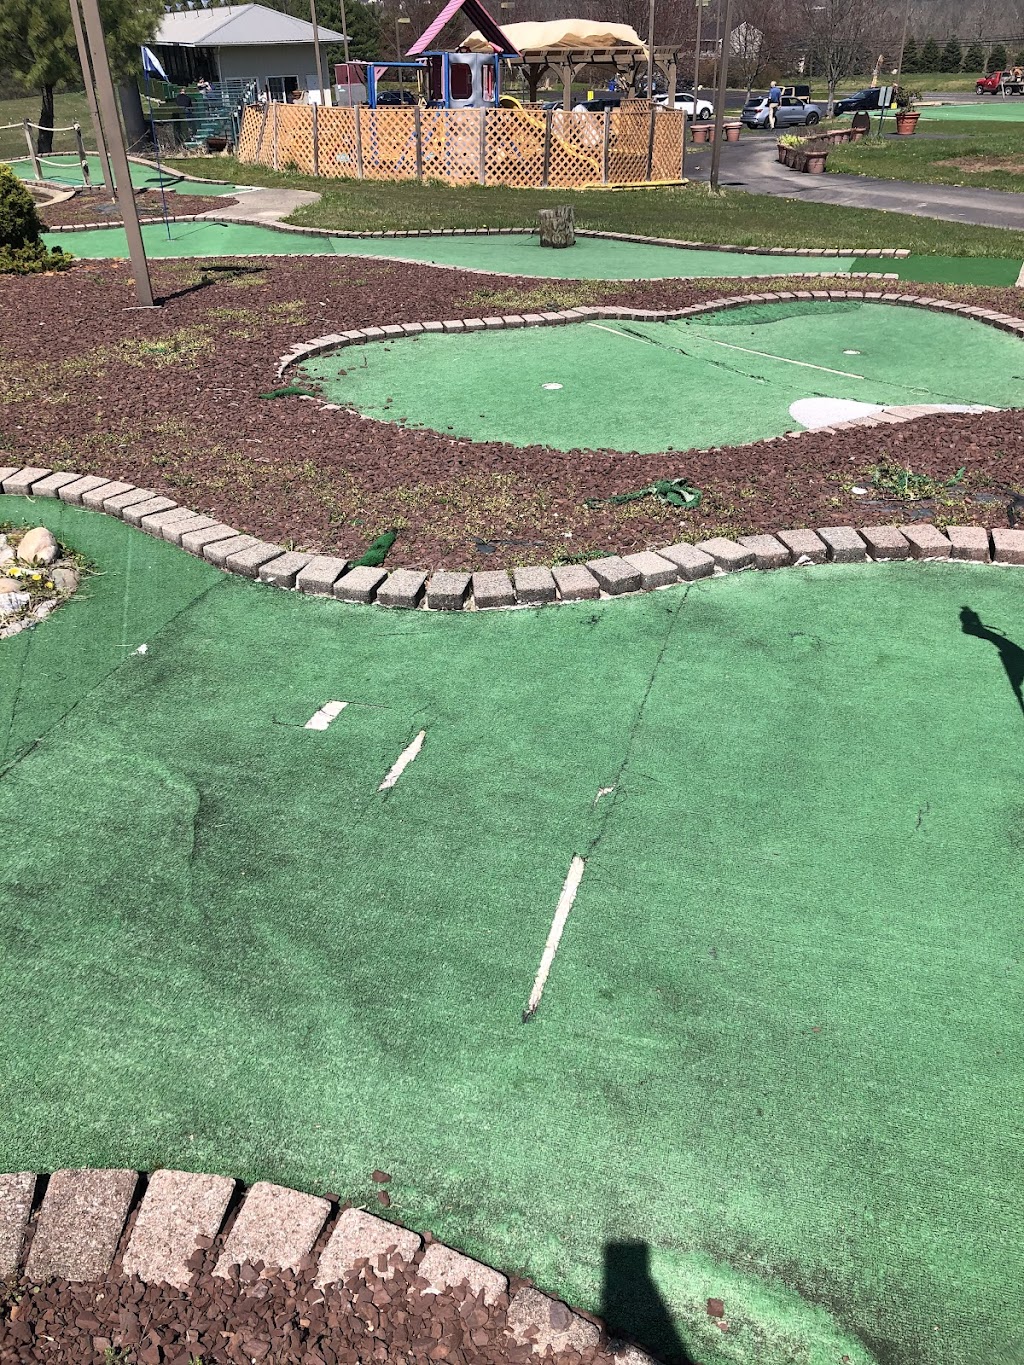 Four Seasons Golf Center | 1208 Swamp Rd, Fountainville, PA 18923 | Phone: (215) 348-5575